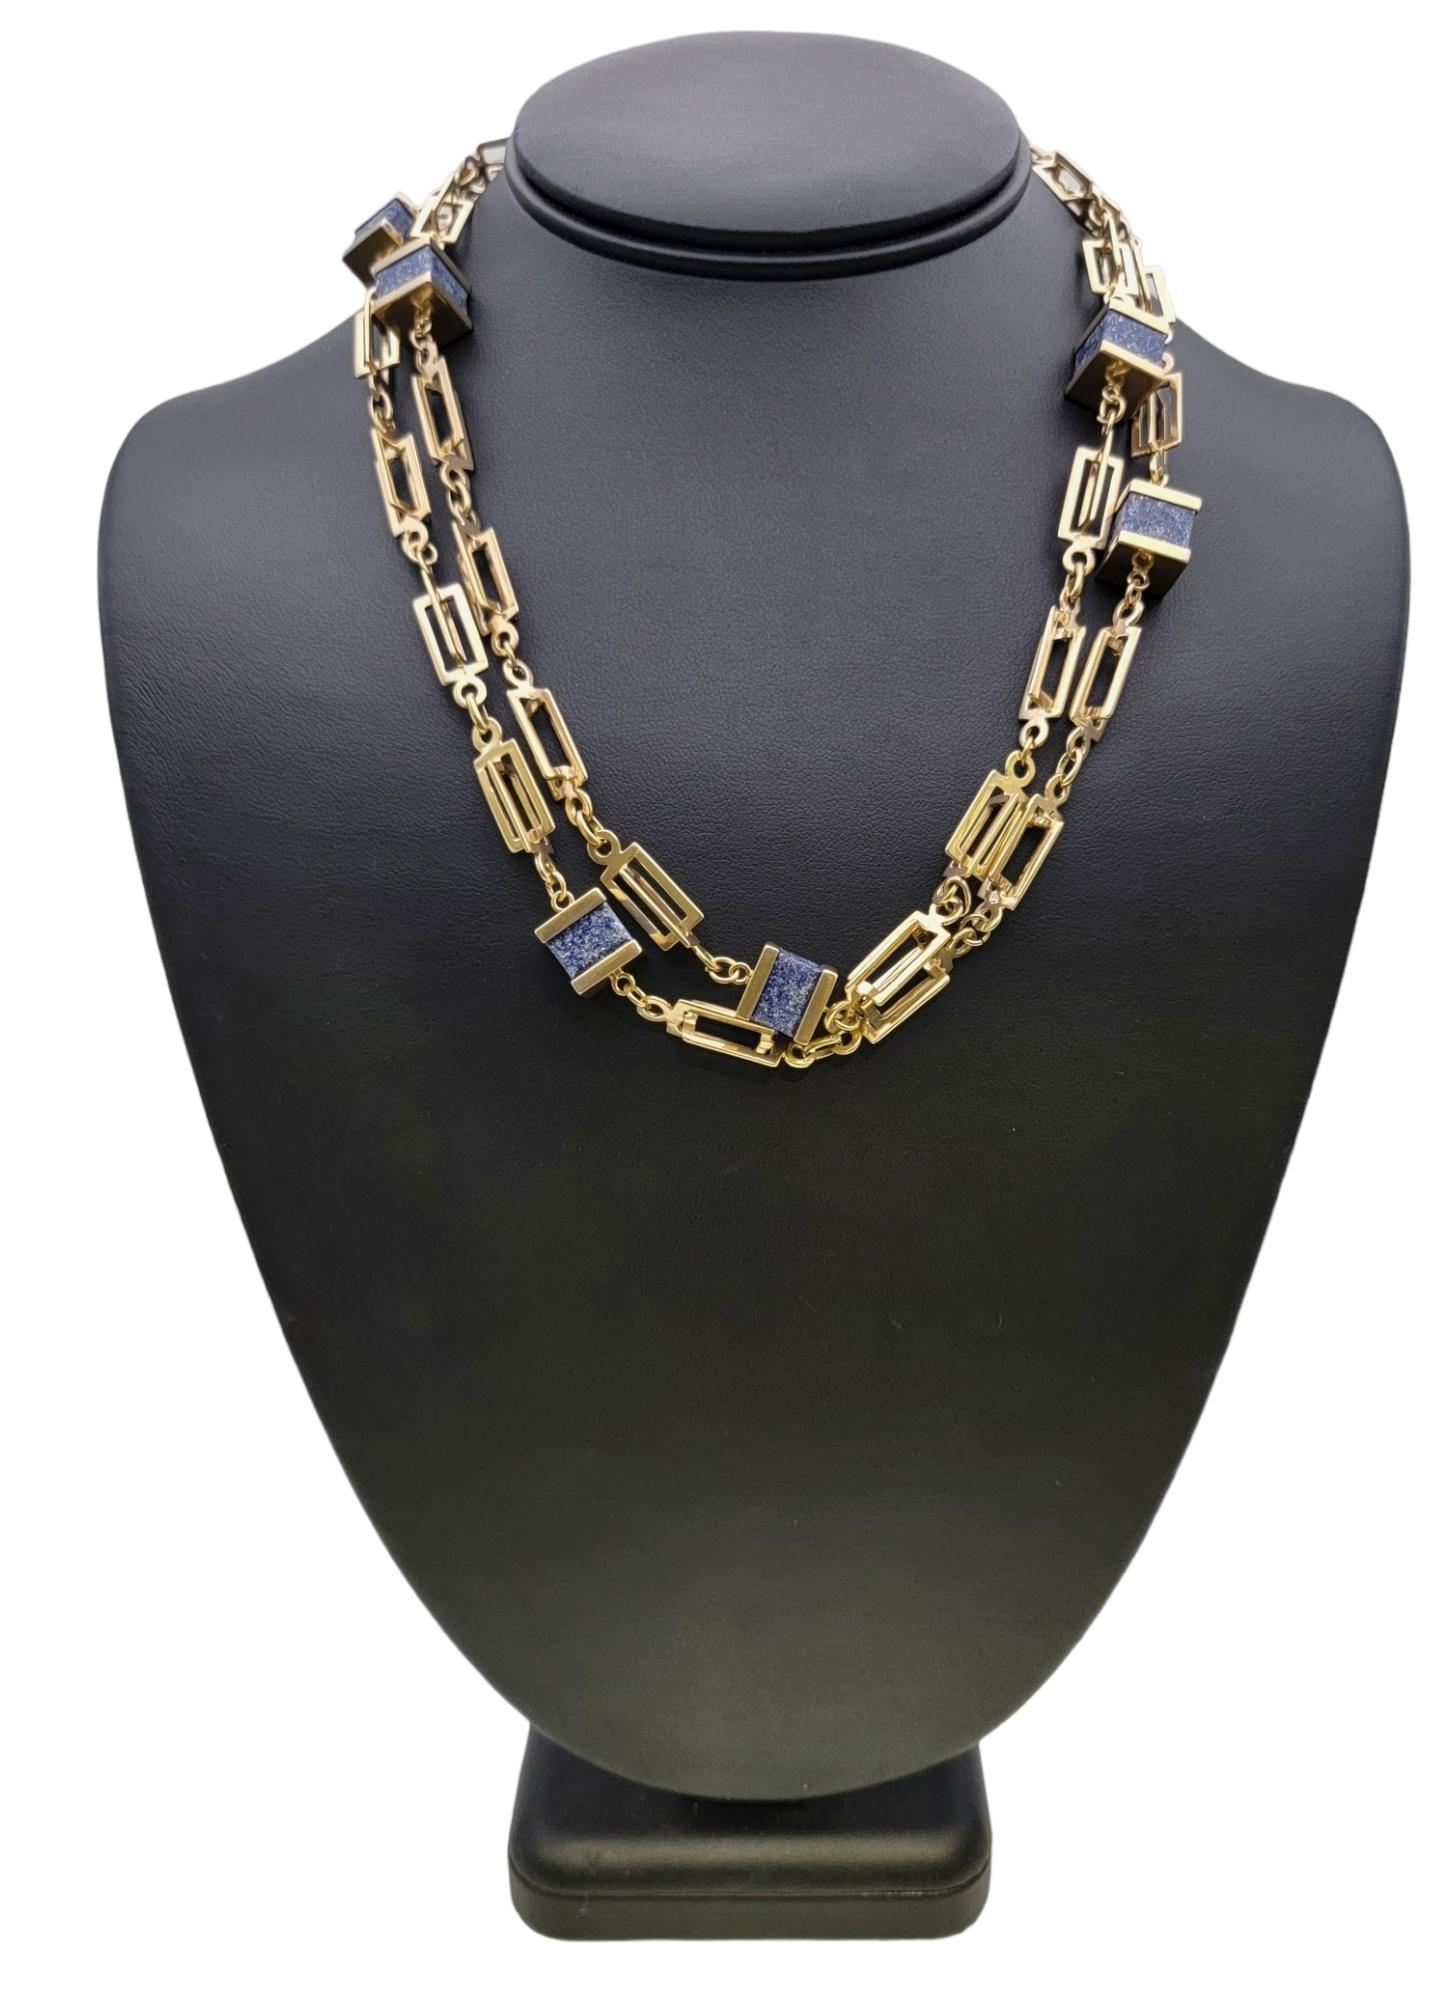 Square Lapis Lazuli Station Necklace with 14 Karat Yellow Gold Chain For Sale 7